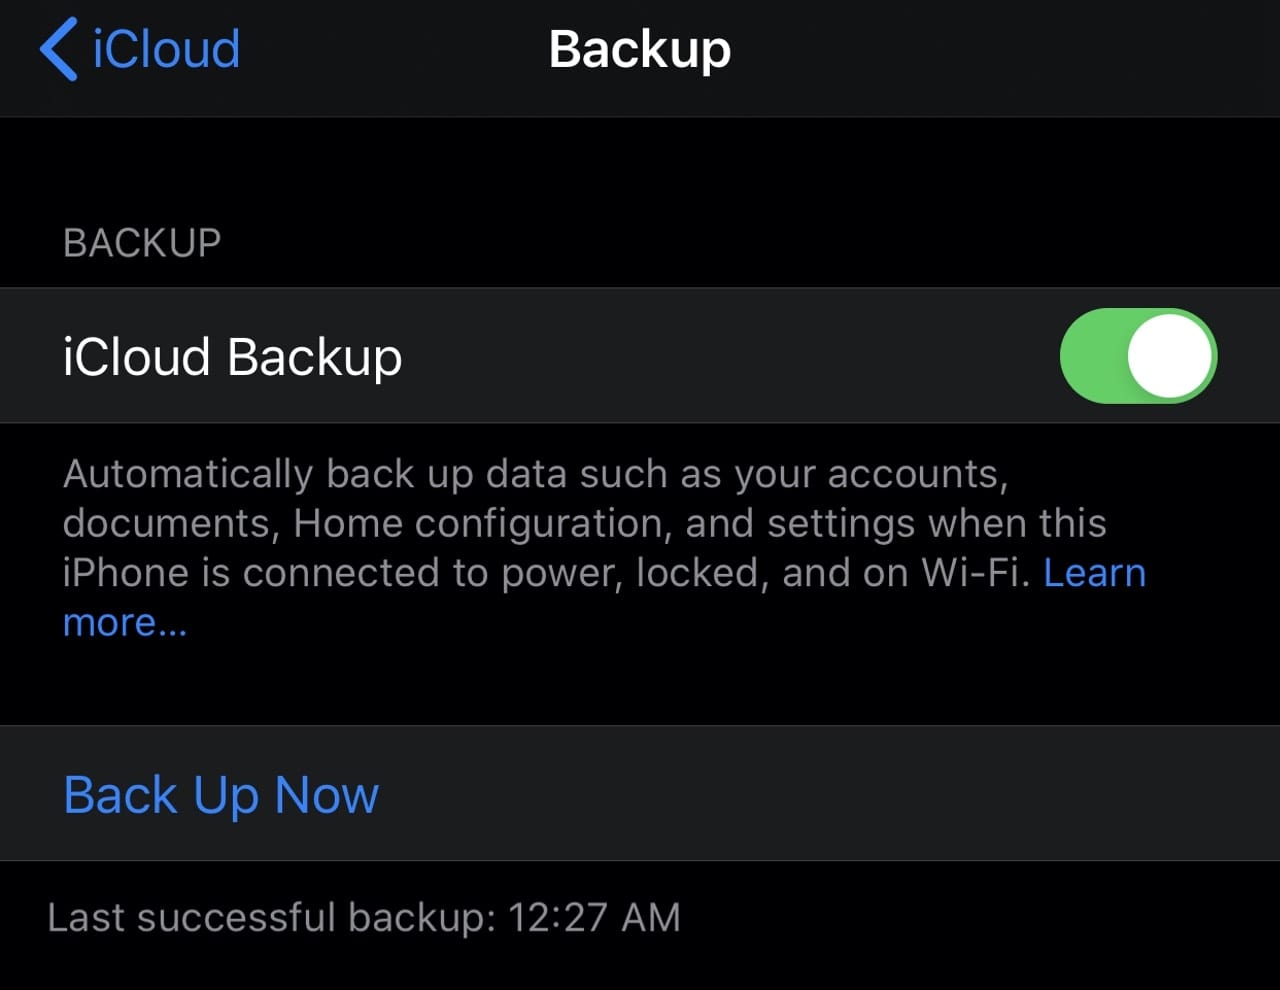 Make sure iCloud Backup is enabled -- the button will be green as seen here